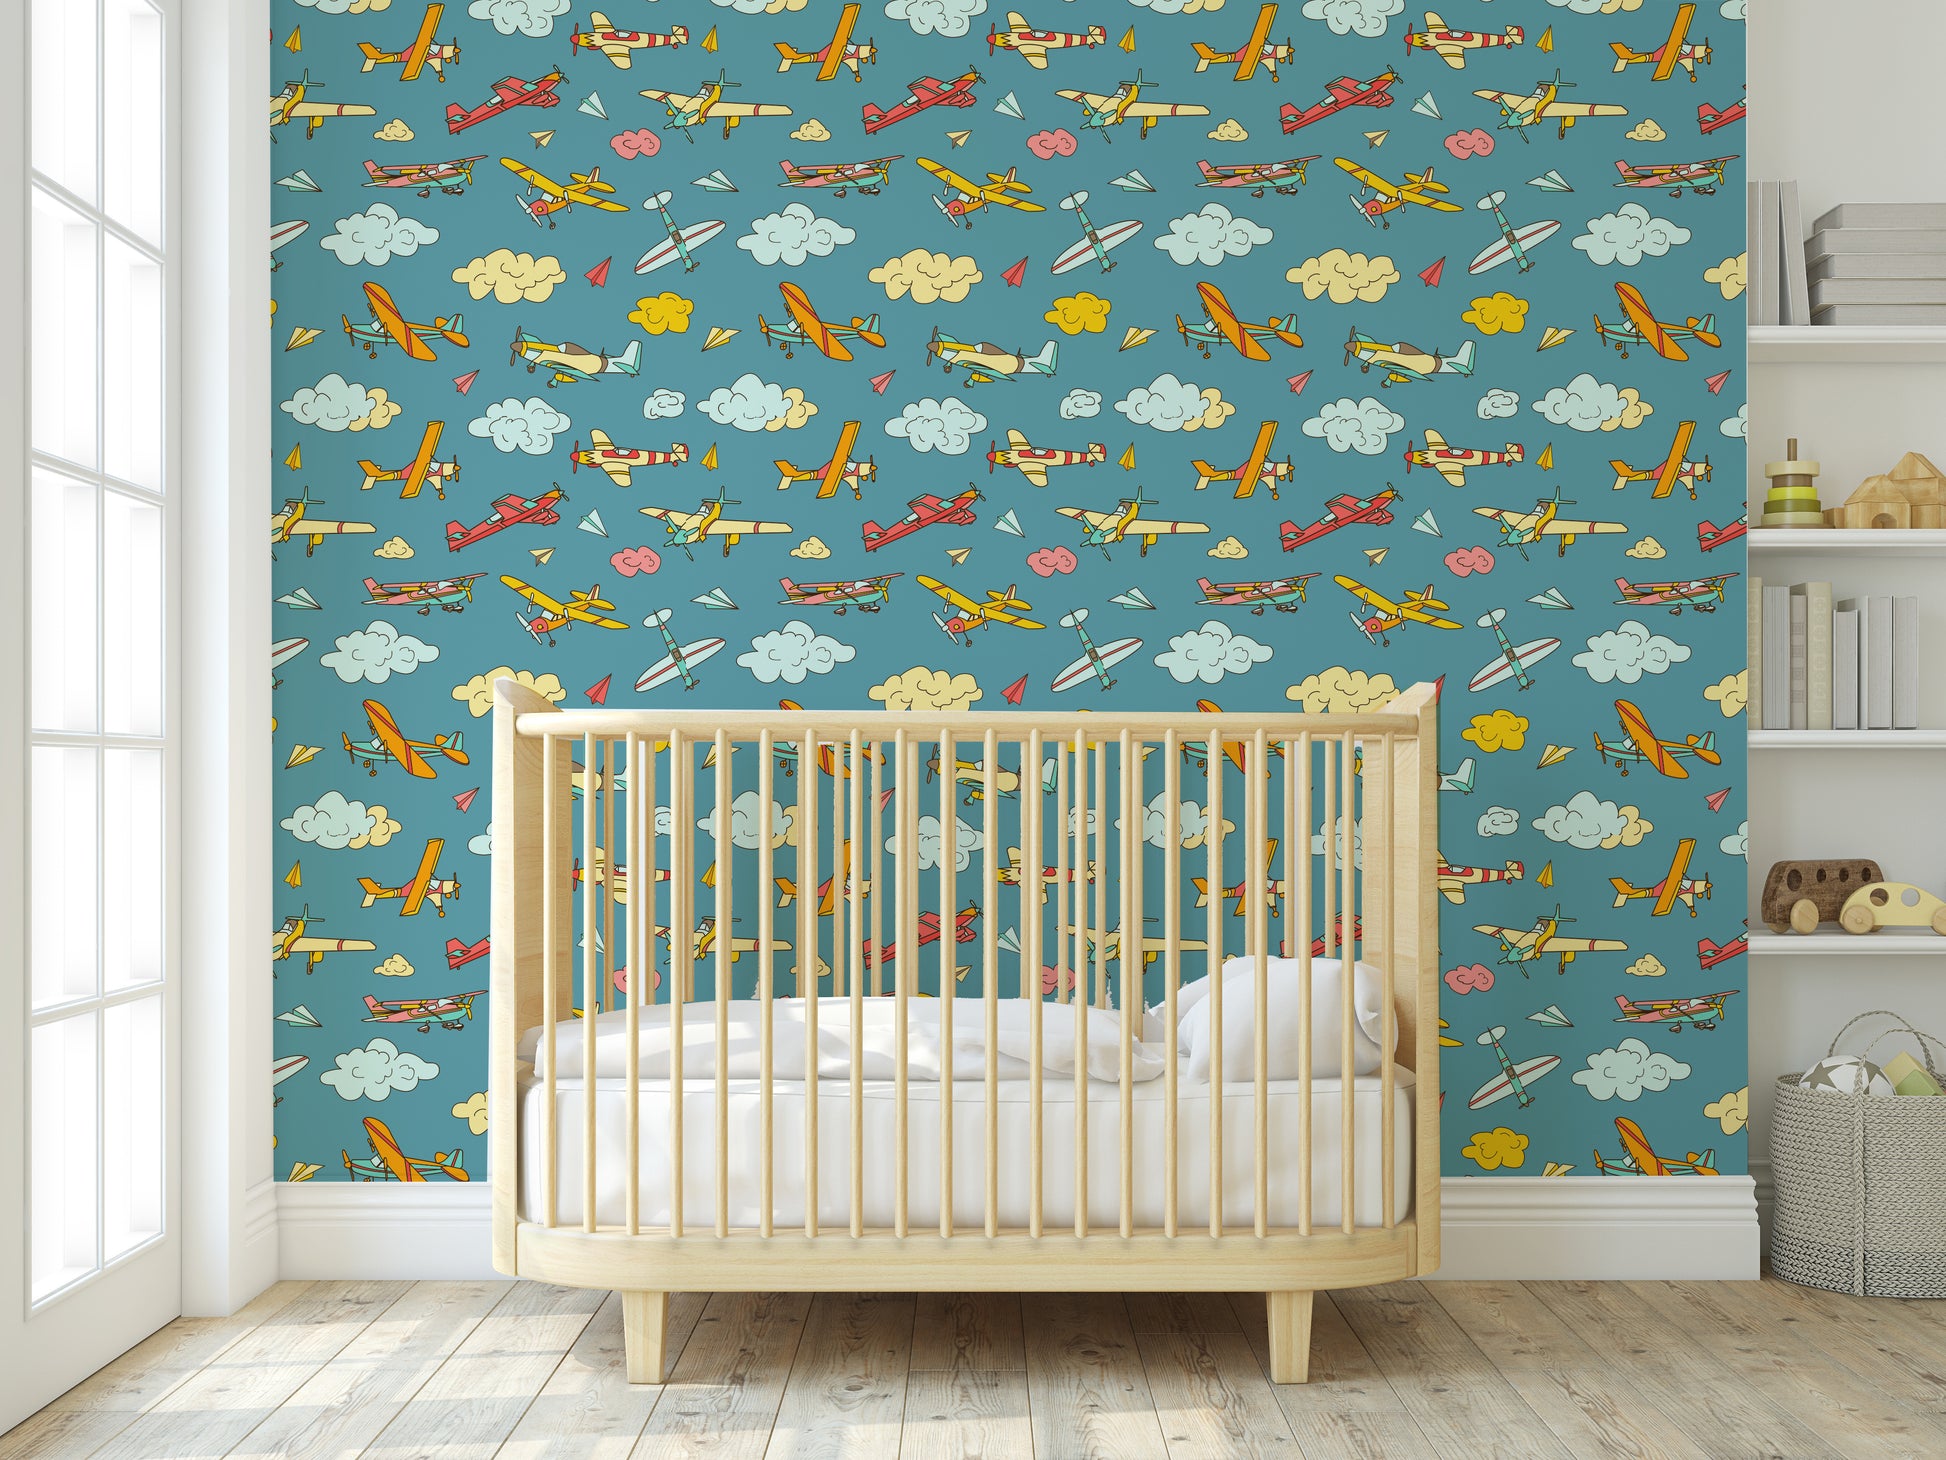 Colorful airplane removable peel and stick wallpaper in a infants nursery.